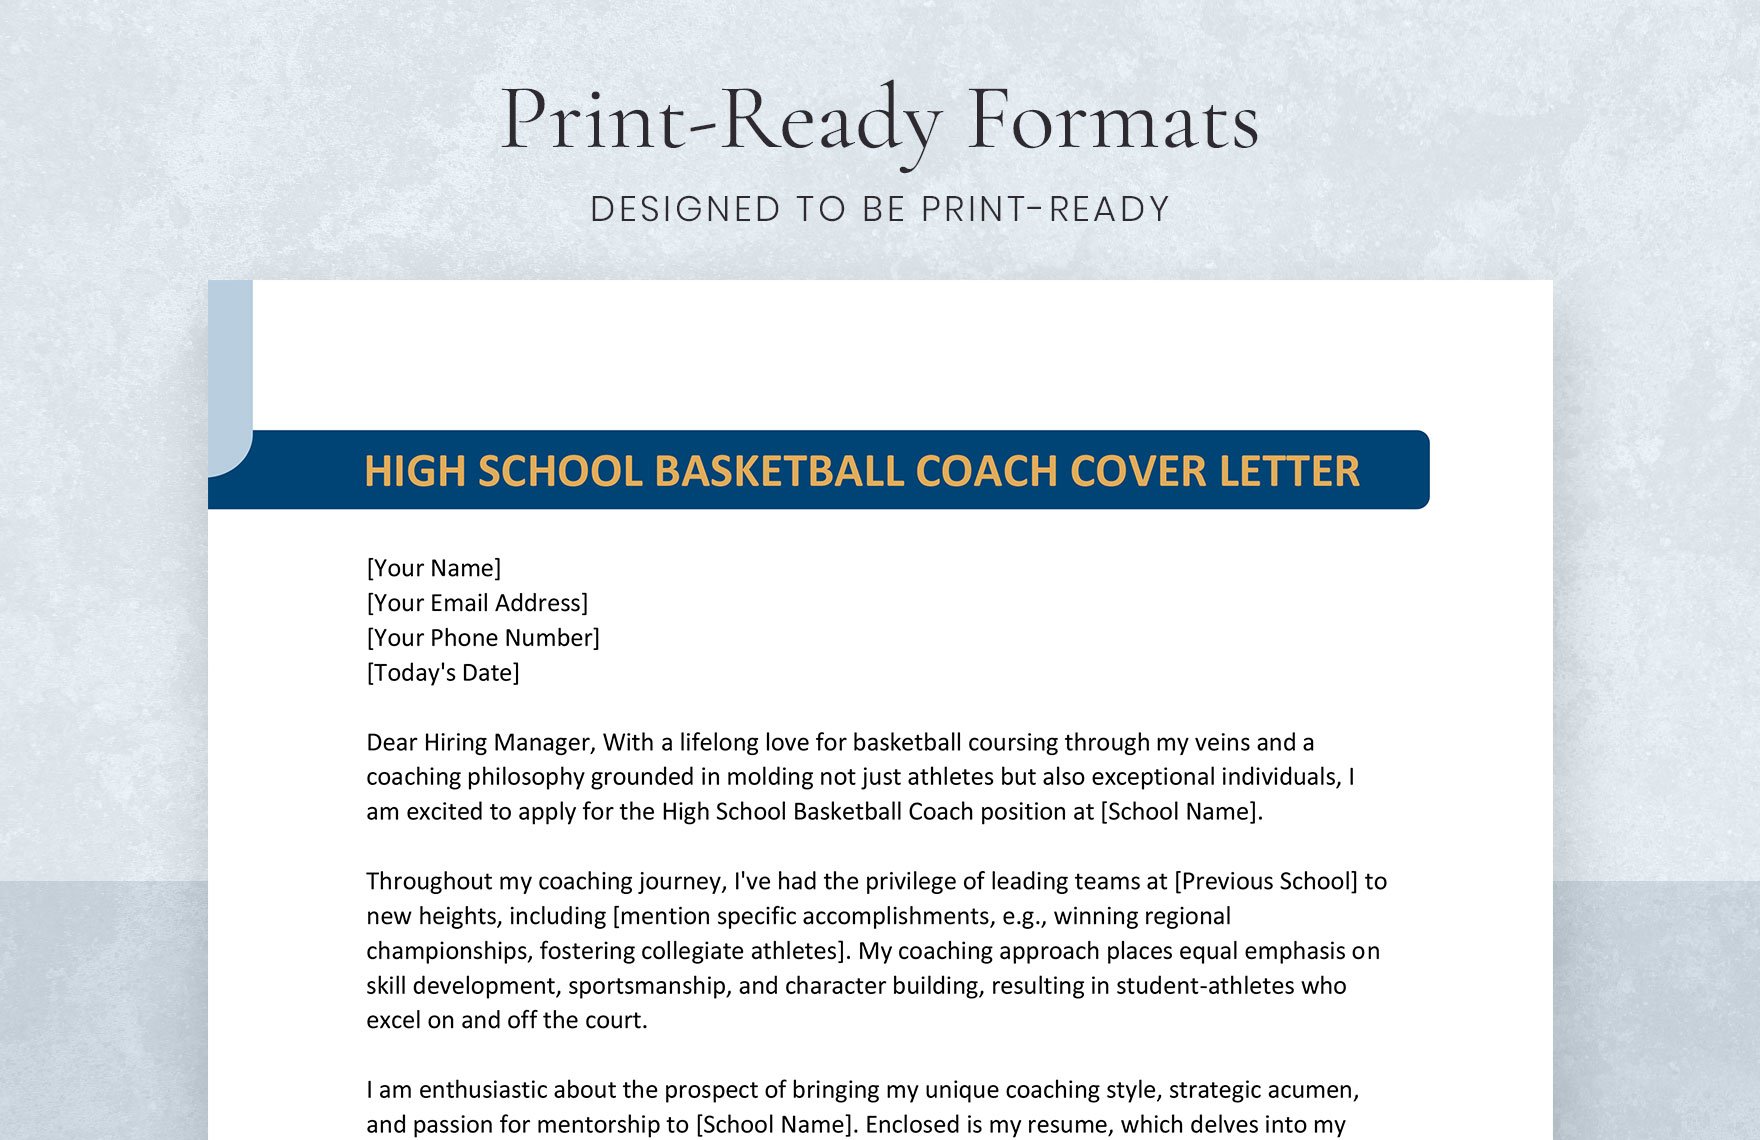 High School Basketball Coach Cover Letter